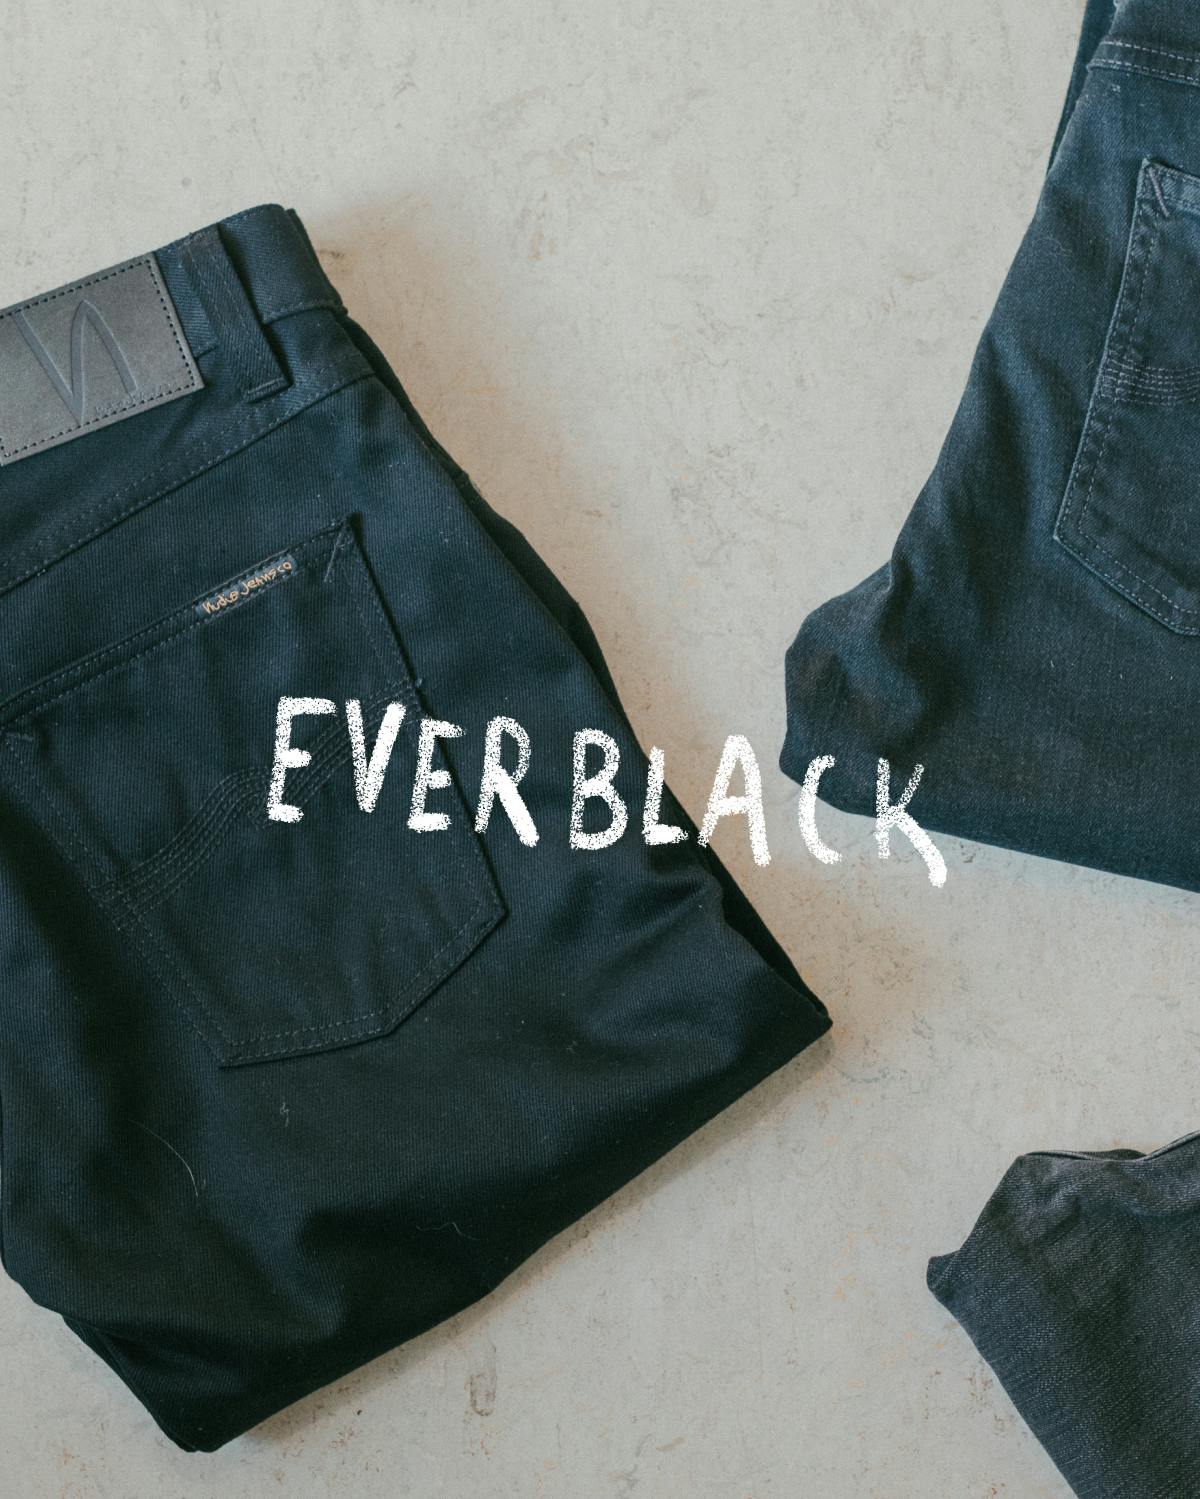 Everblack is a "piece-dyed black denim," but it is dyed using reactive black dye which have far superior colorfastness properties compared to sulfur dyes. 